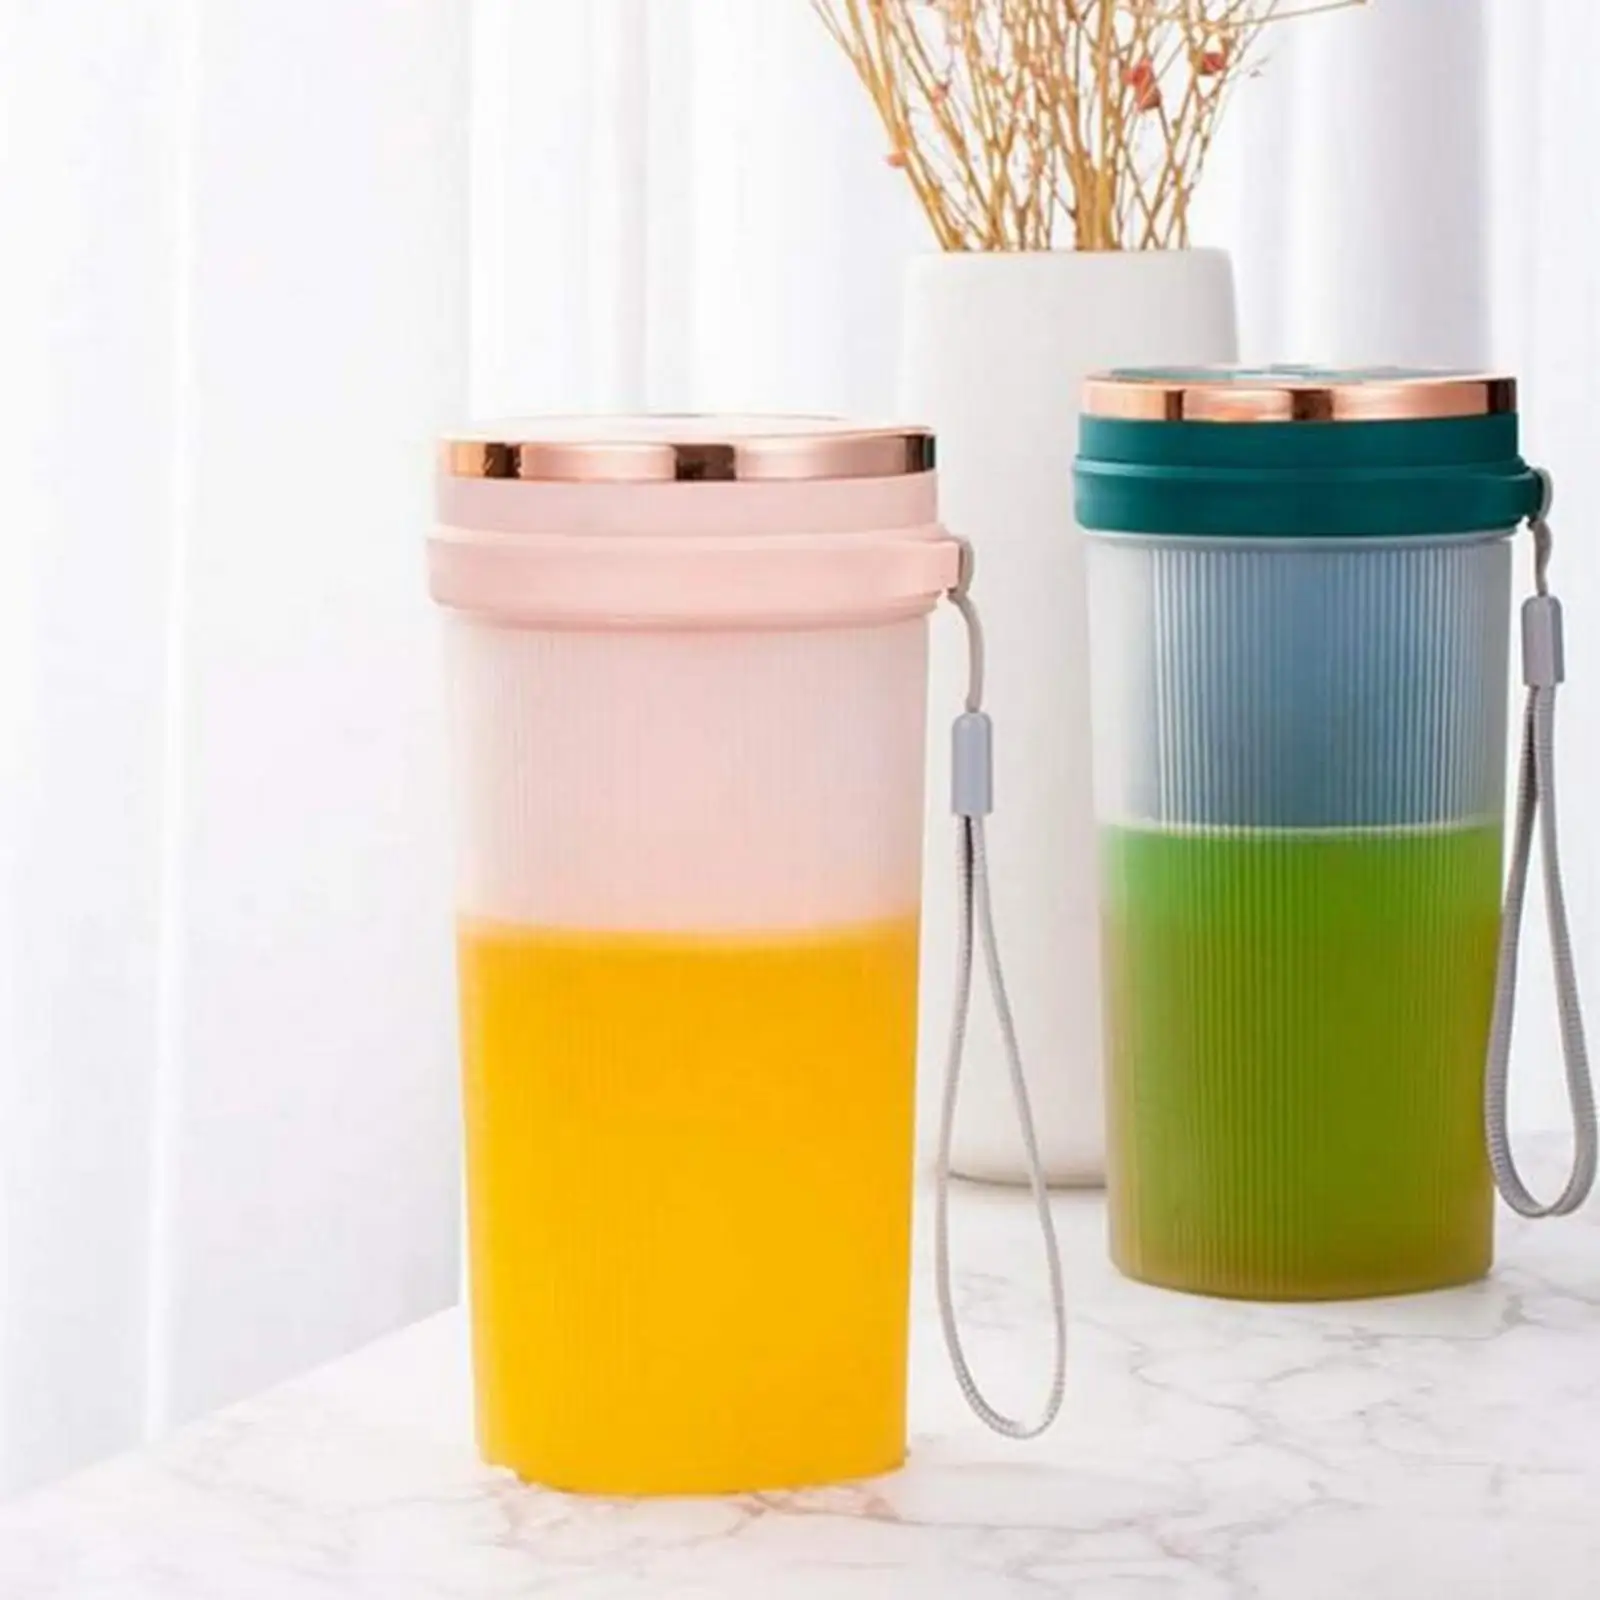 Portable Juicer Blender, Juice Cup USB Reable Mixer Cup Personal